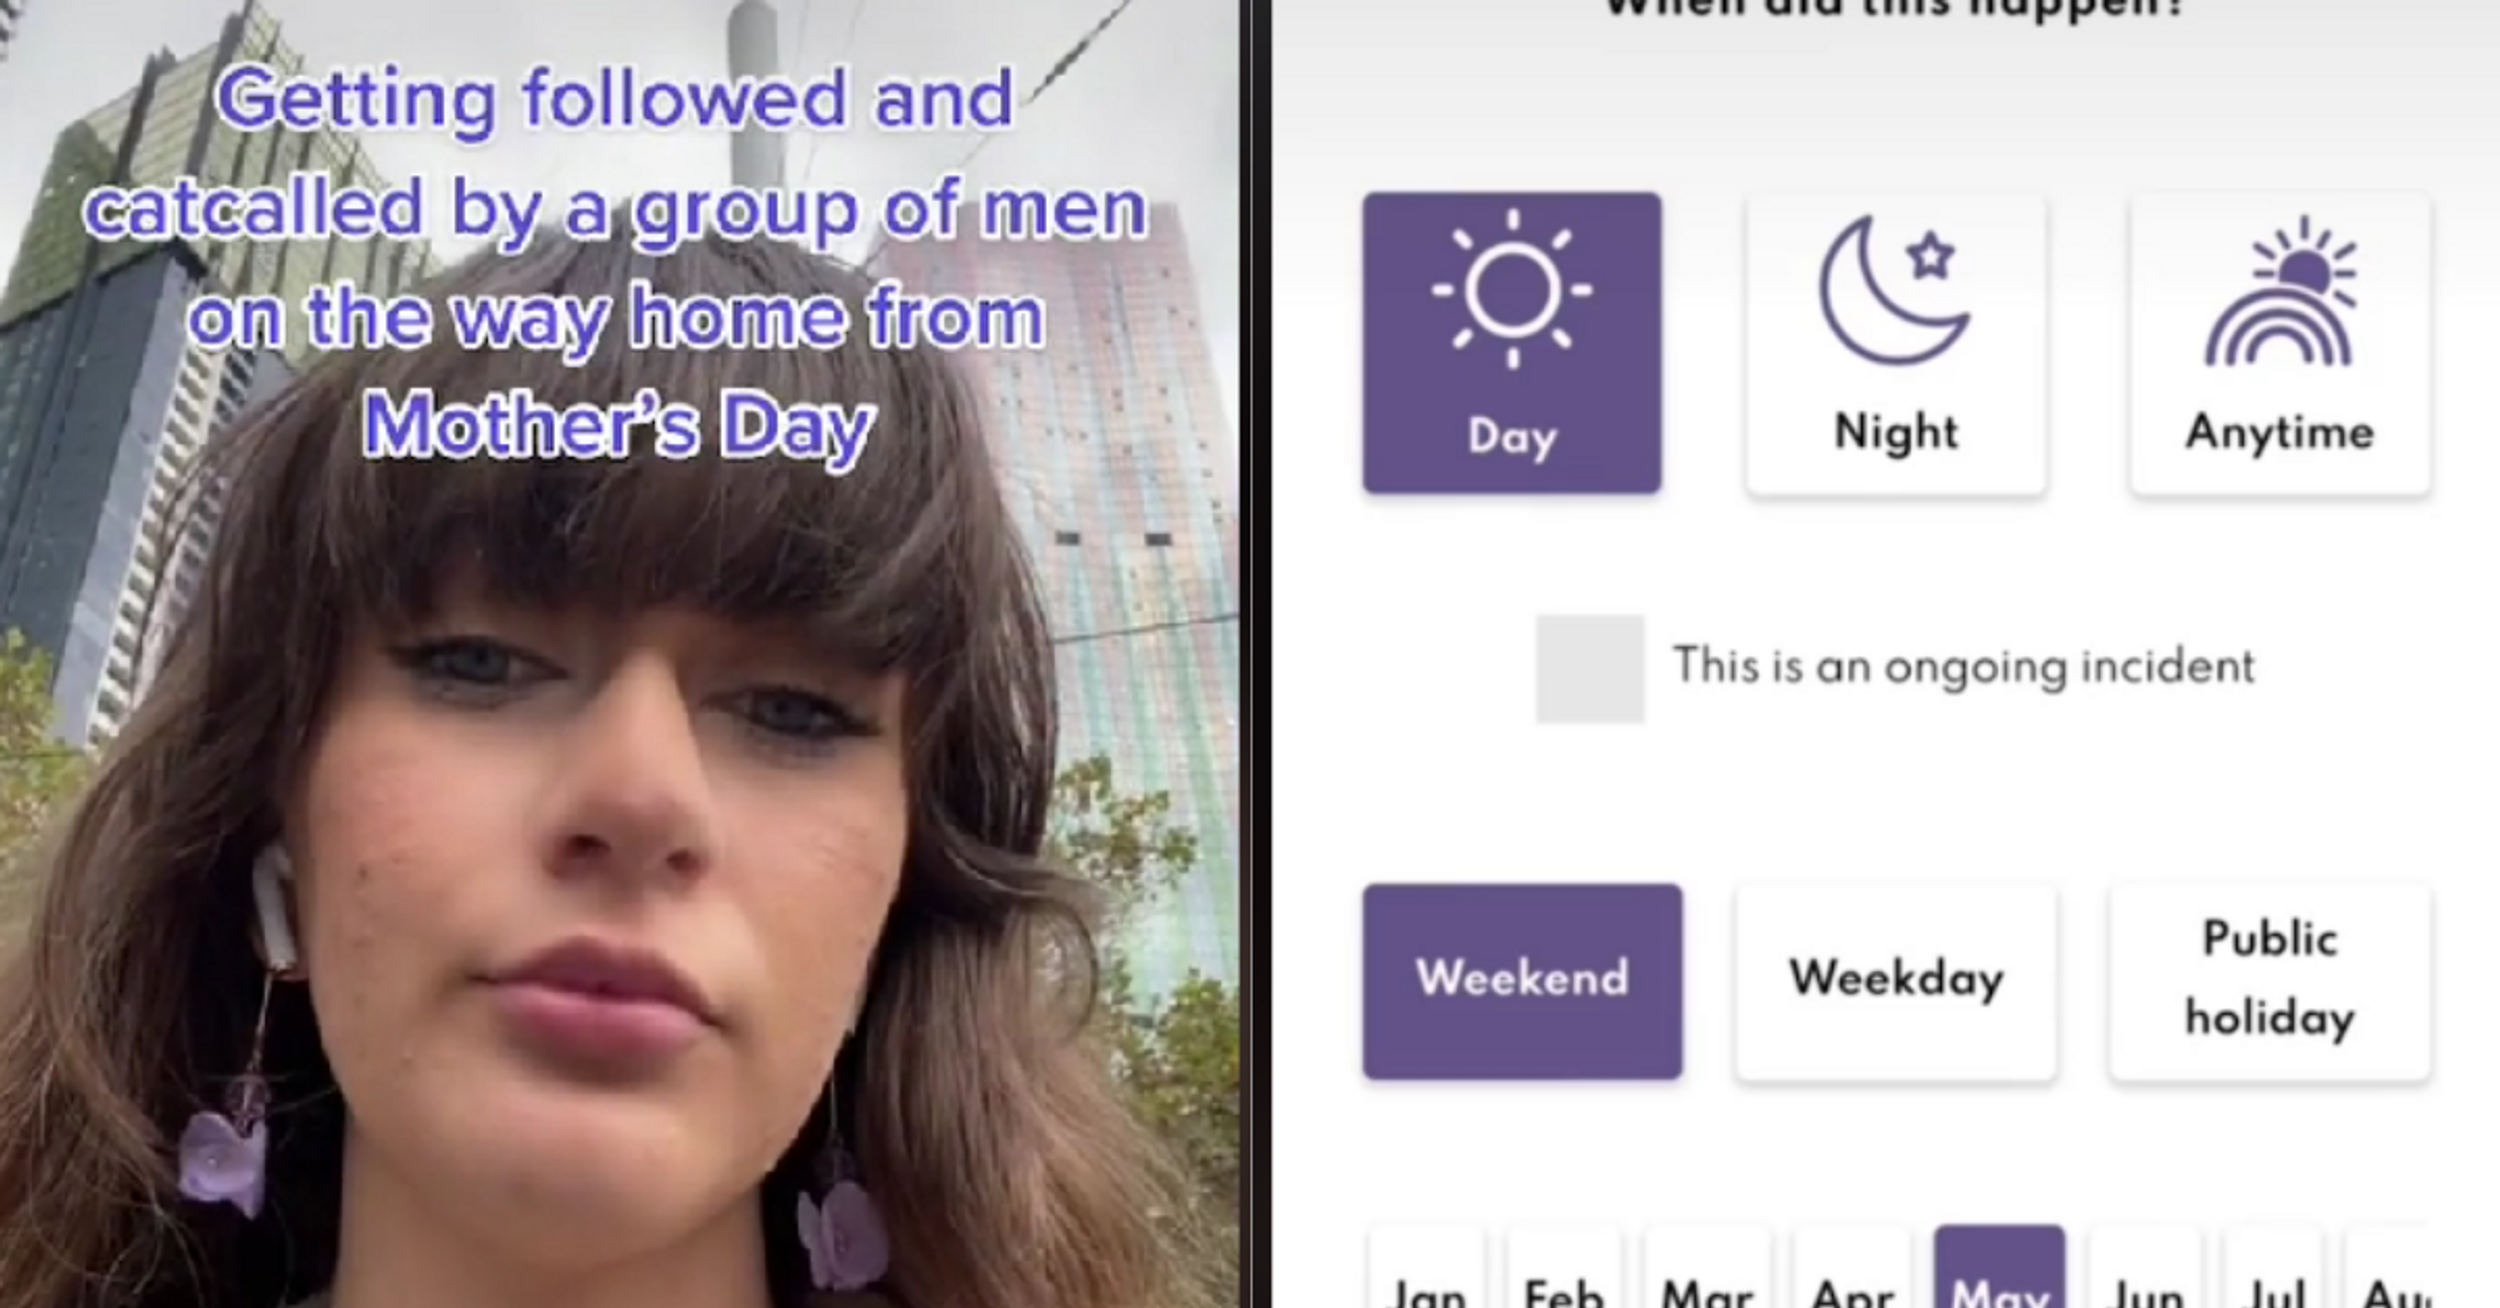 New Website For Women To Anonymously Report Catcalling Goes Viral On TikTok—And It's Genius